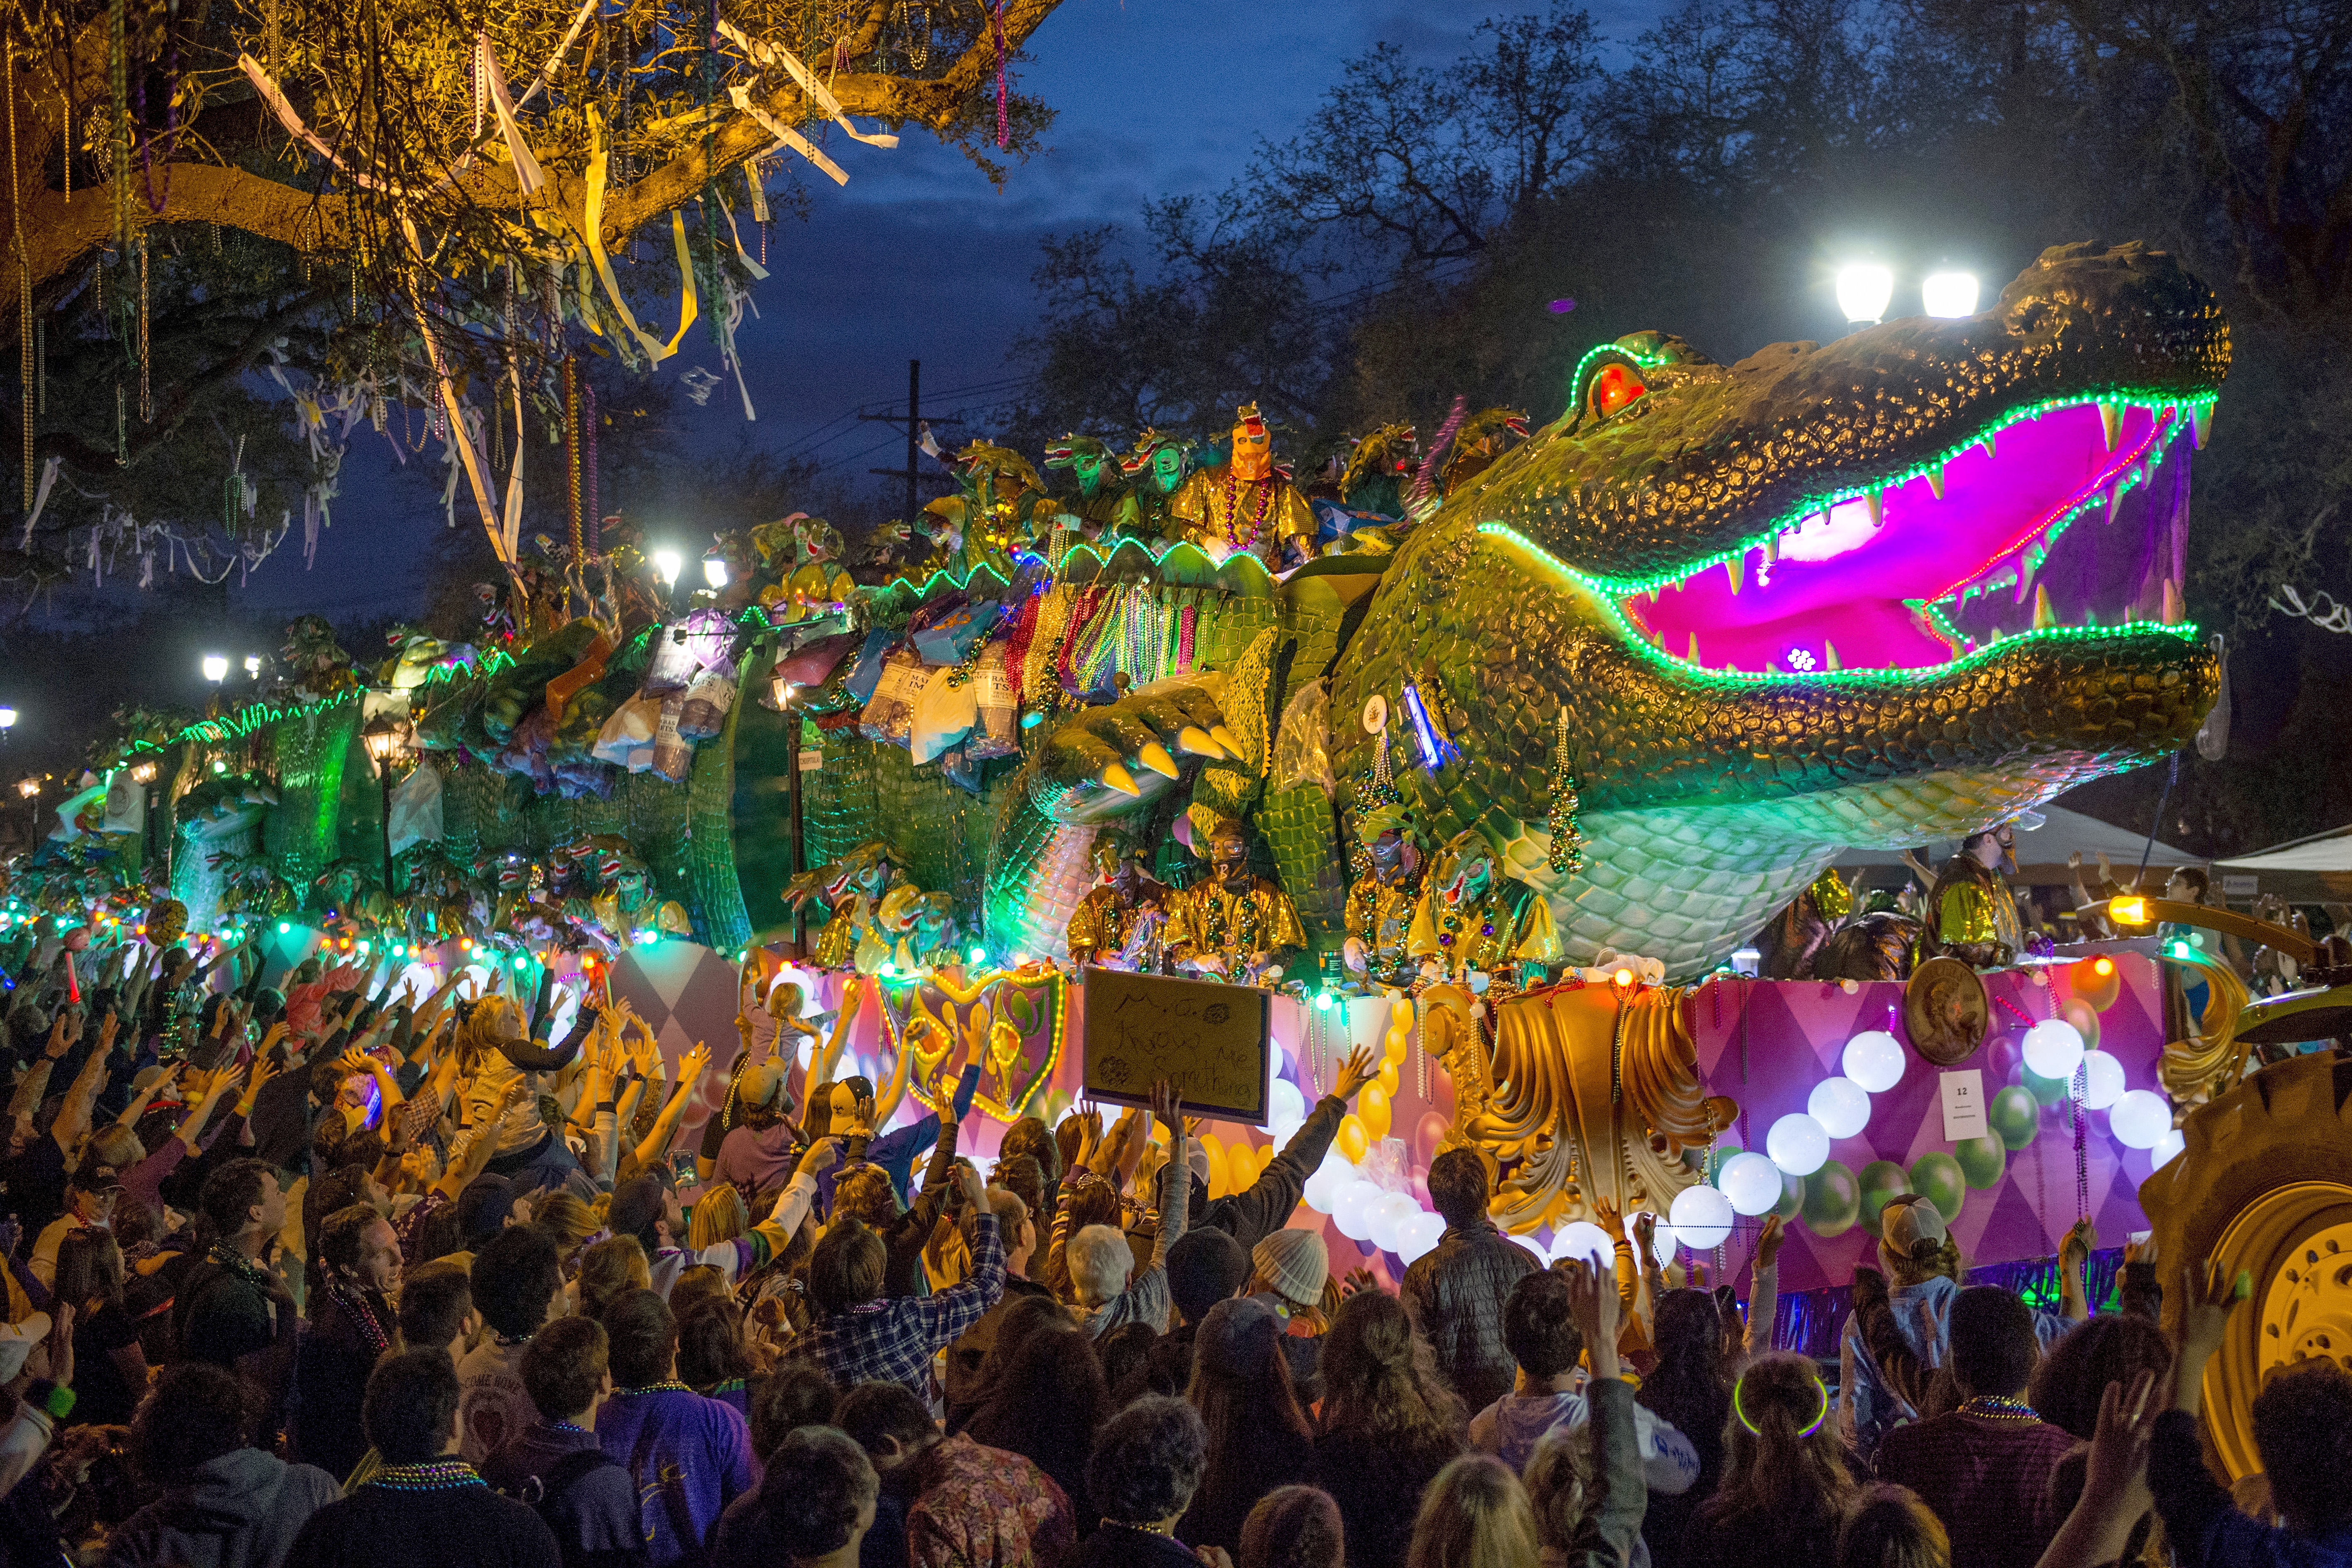 How Much it Costs to Go to New Orleans for Mardi Gras | Money